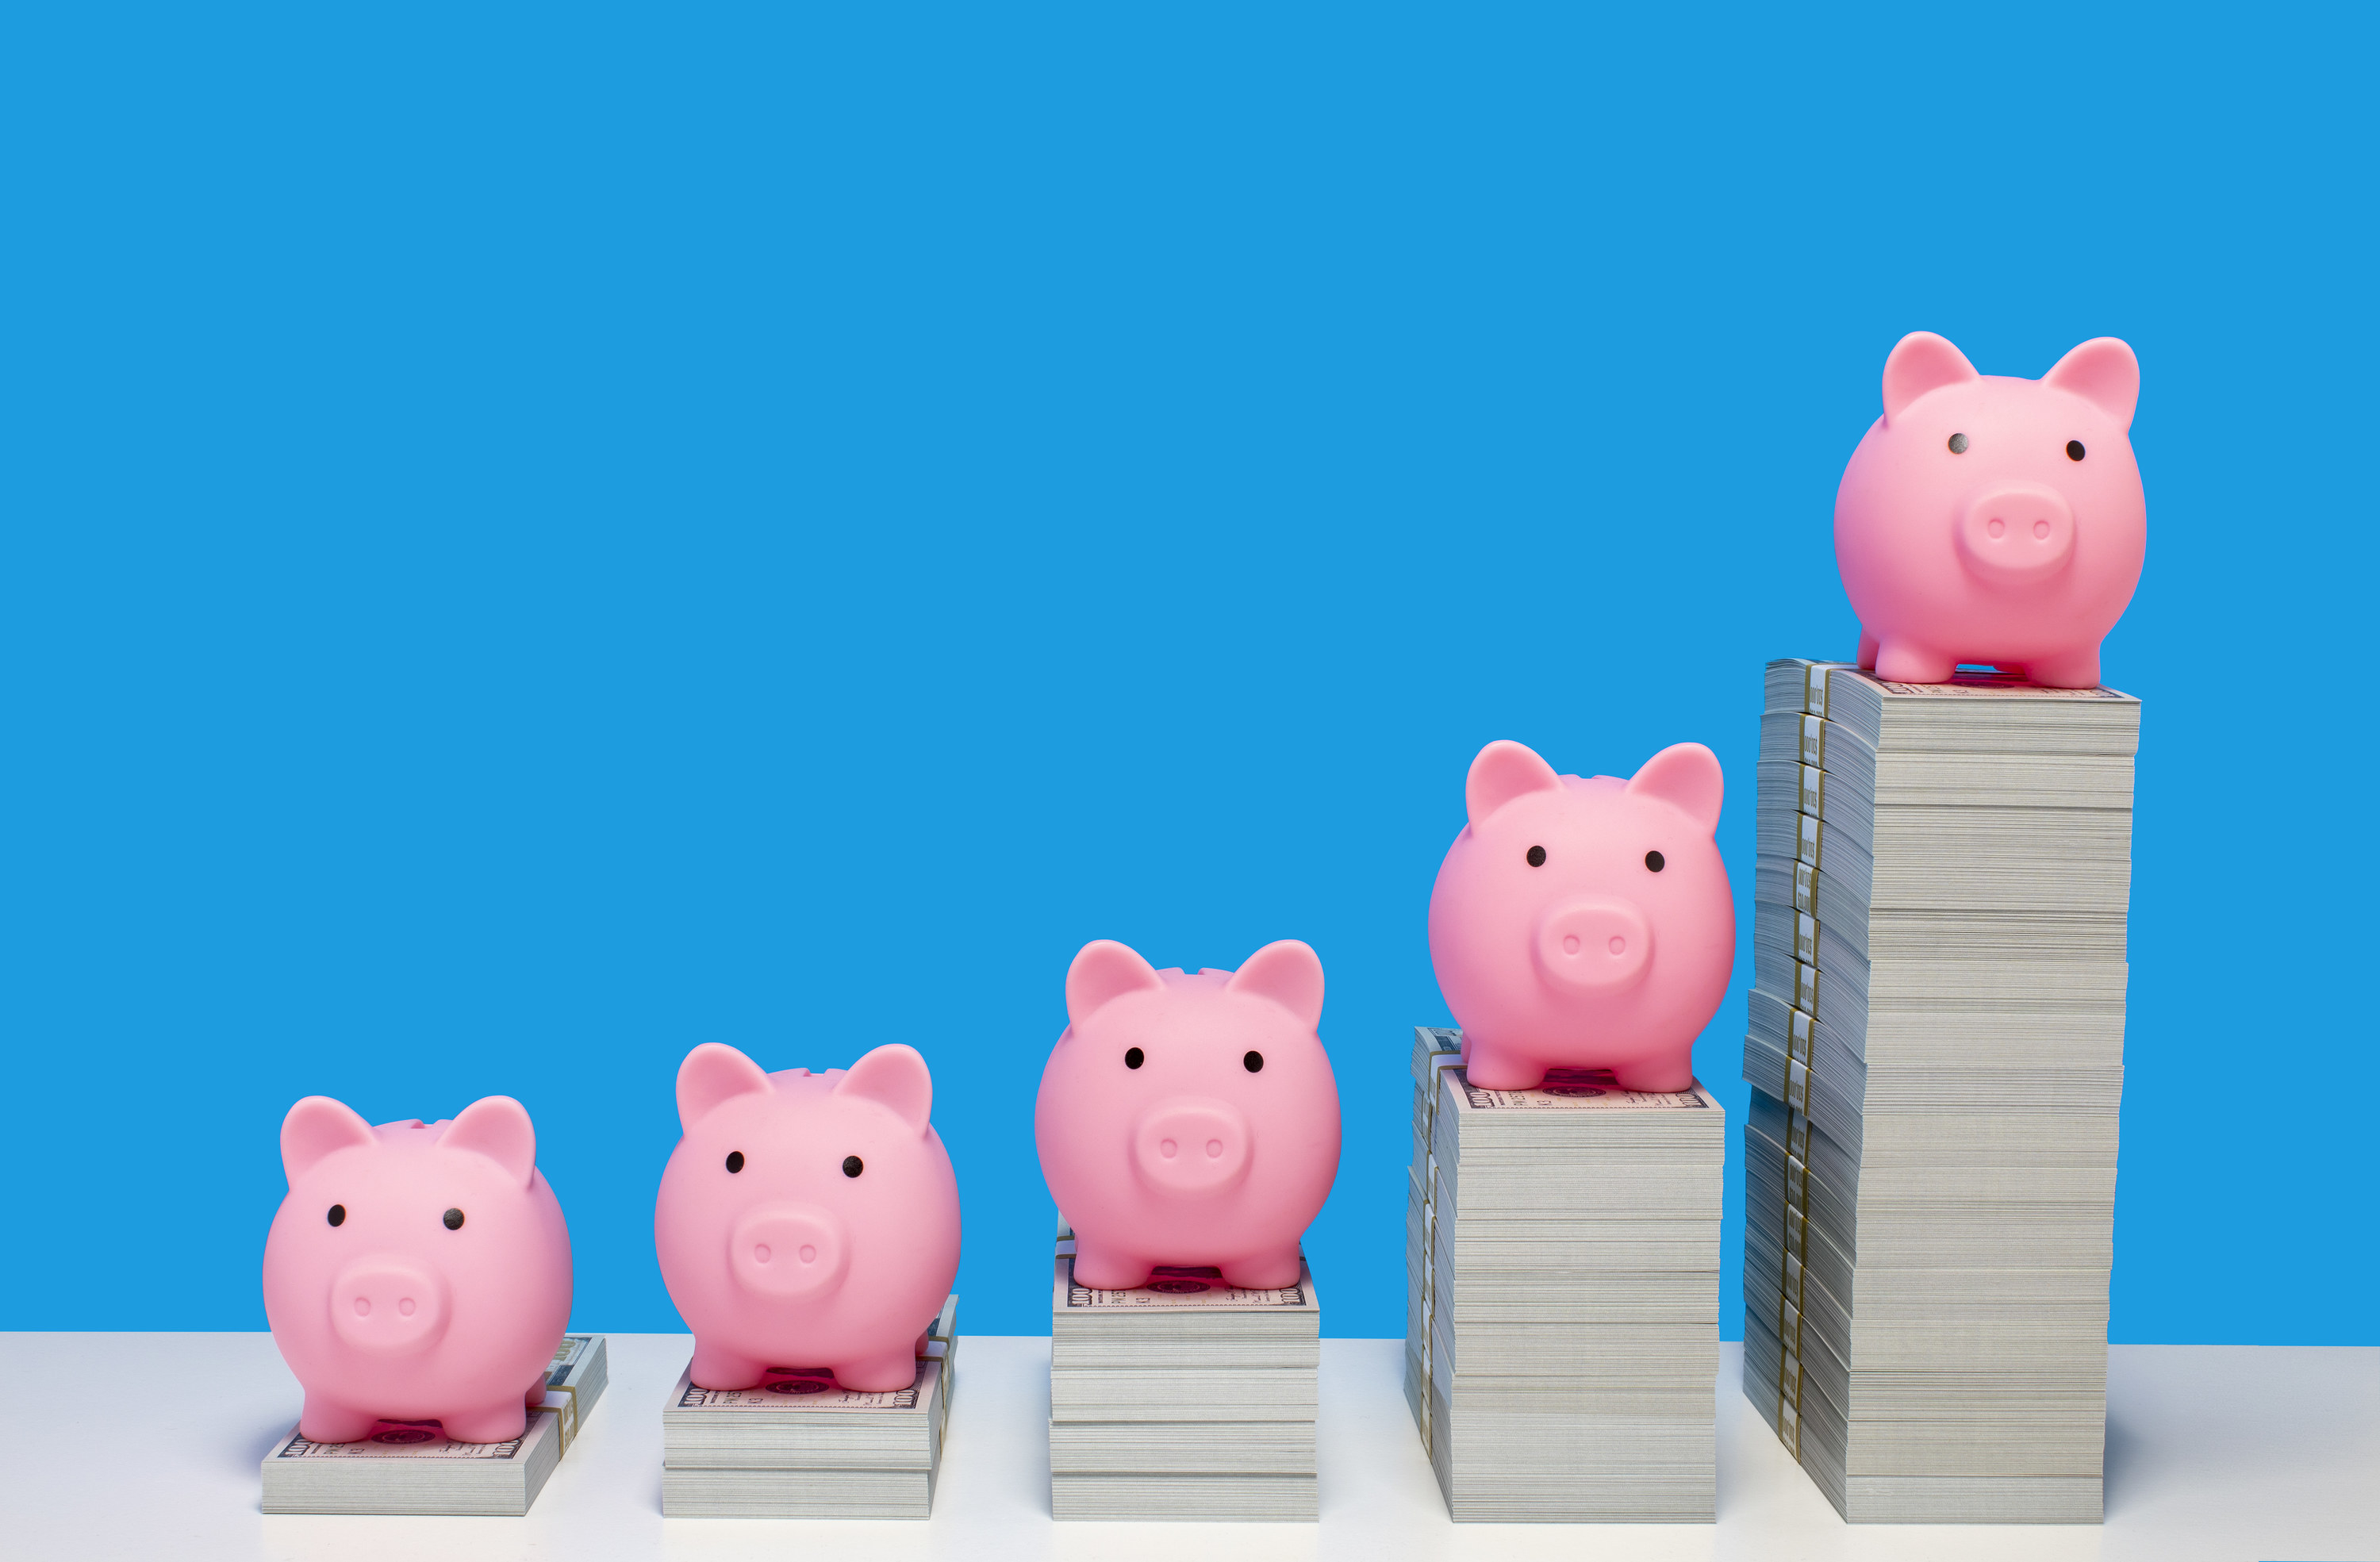 piggy banks on increasingly tall stacks of cash